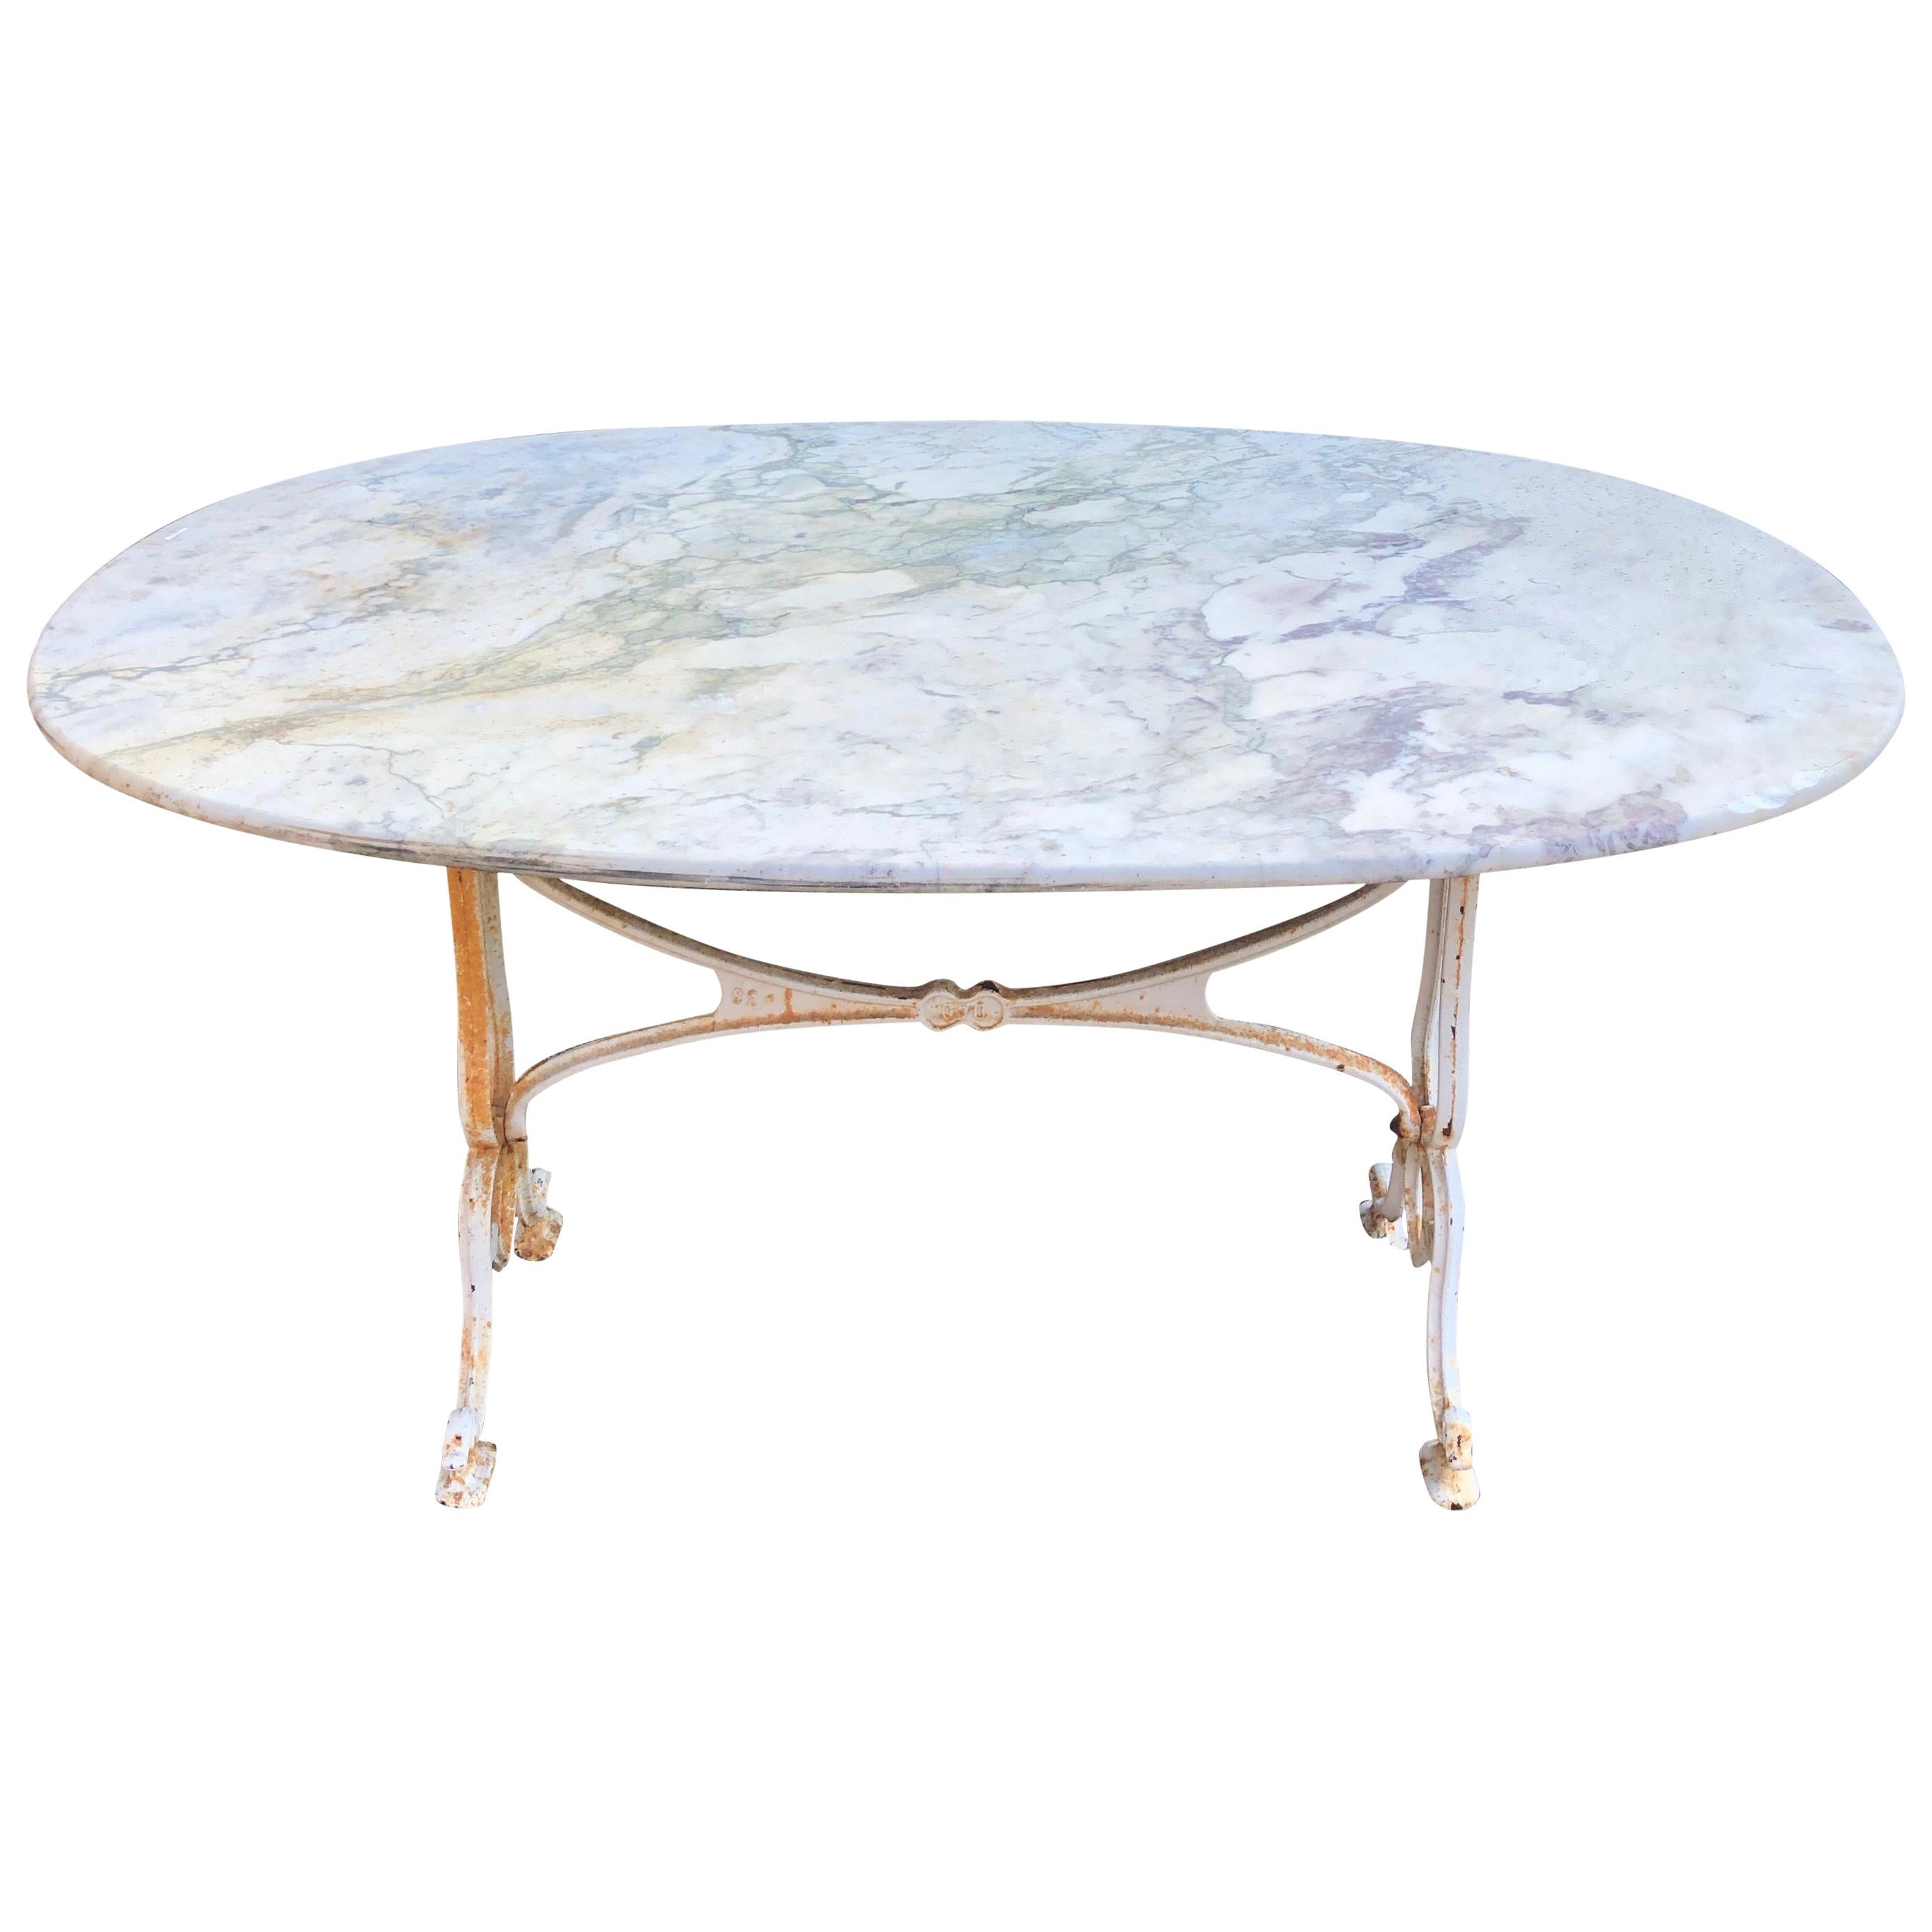 French Oval Marble-Topped Dining Table with Cast Iron Base